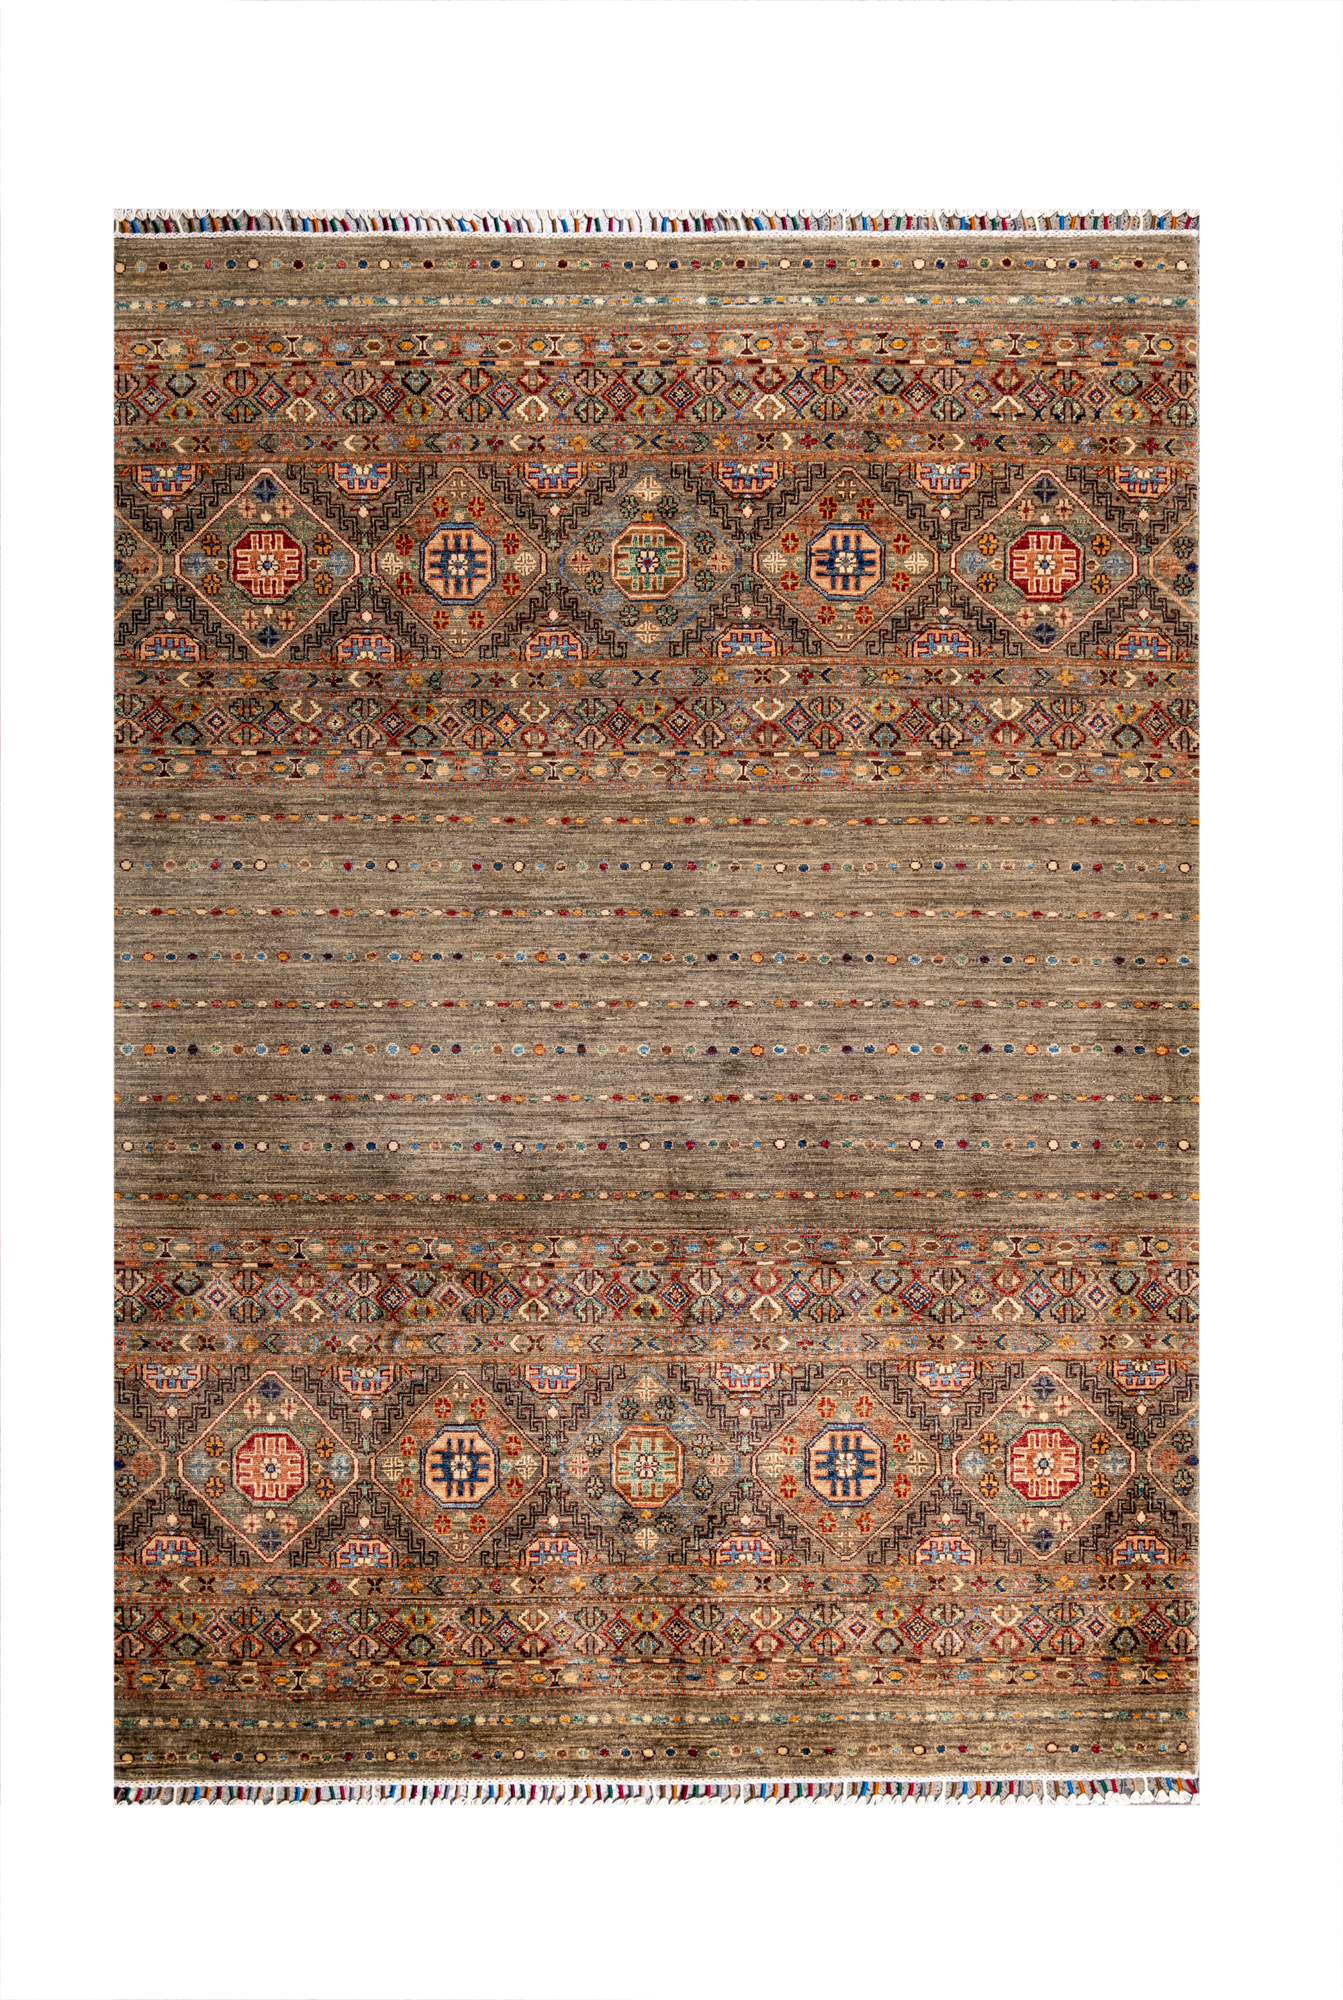 Size: 172x241cmFoundation: CottonPile: Handspun WoolShape: Rectangular Hand knotted and meticulously crafted by Afghan artisans in Afghanistan, this stunning Khorjin rug is made o